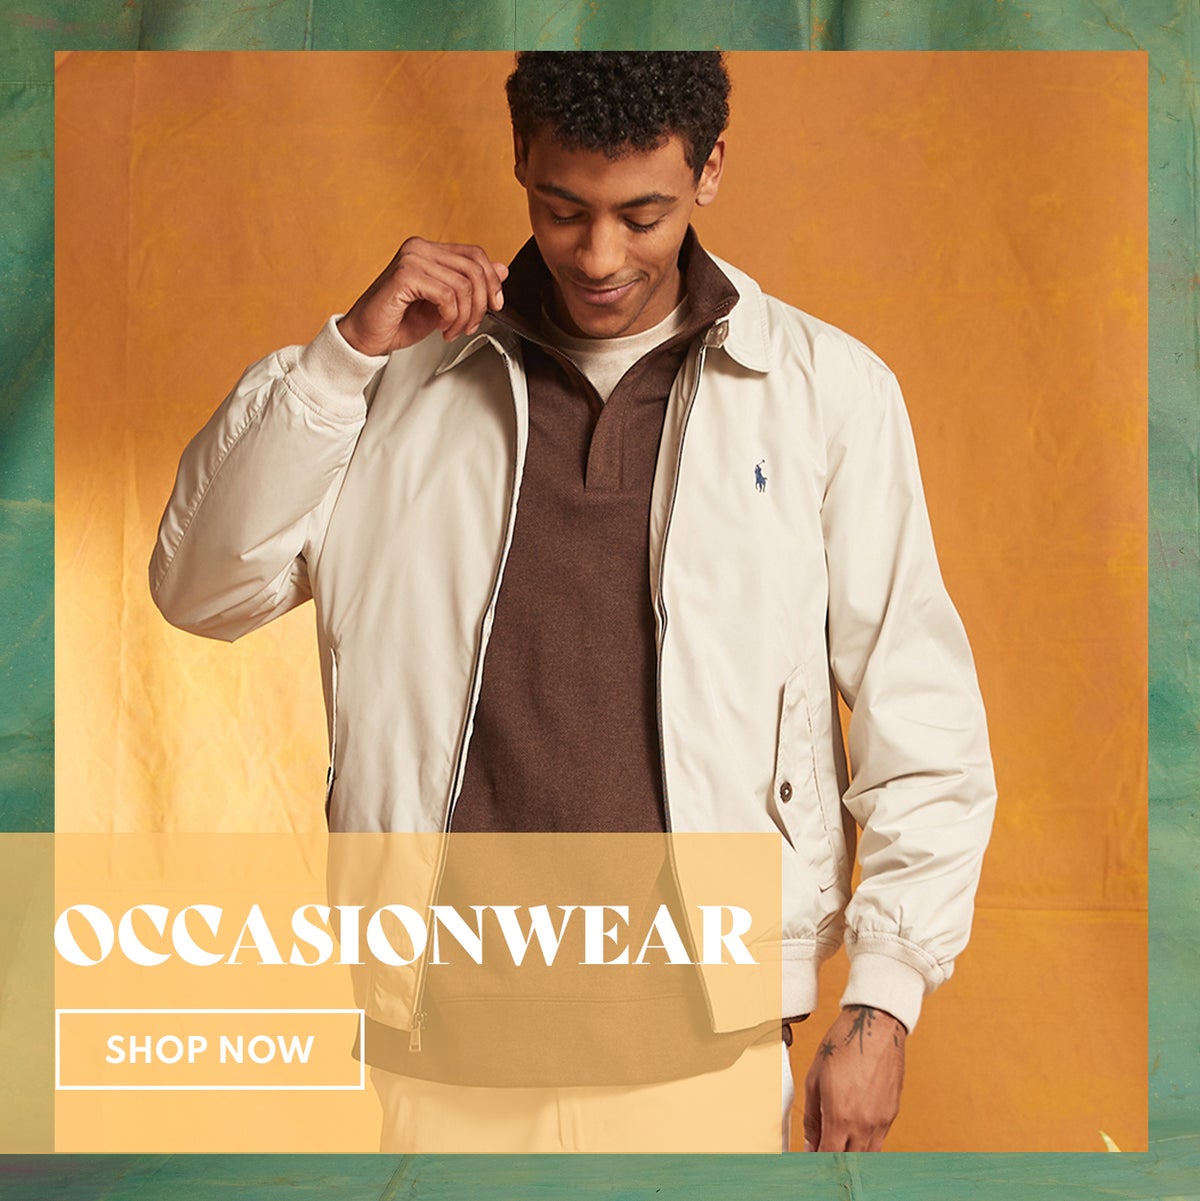 Occassion Wear Shop Now